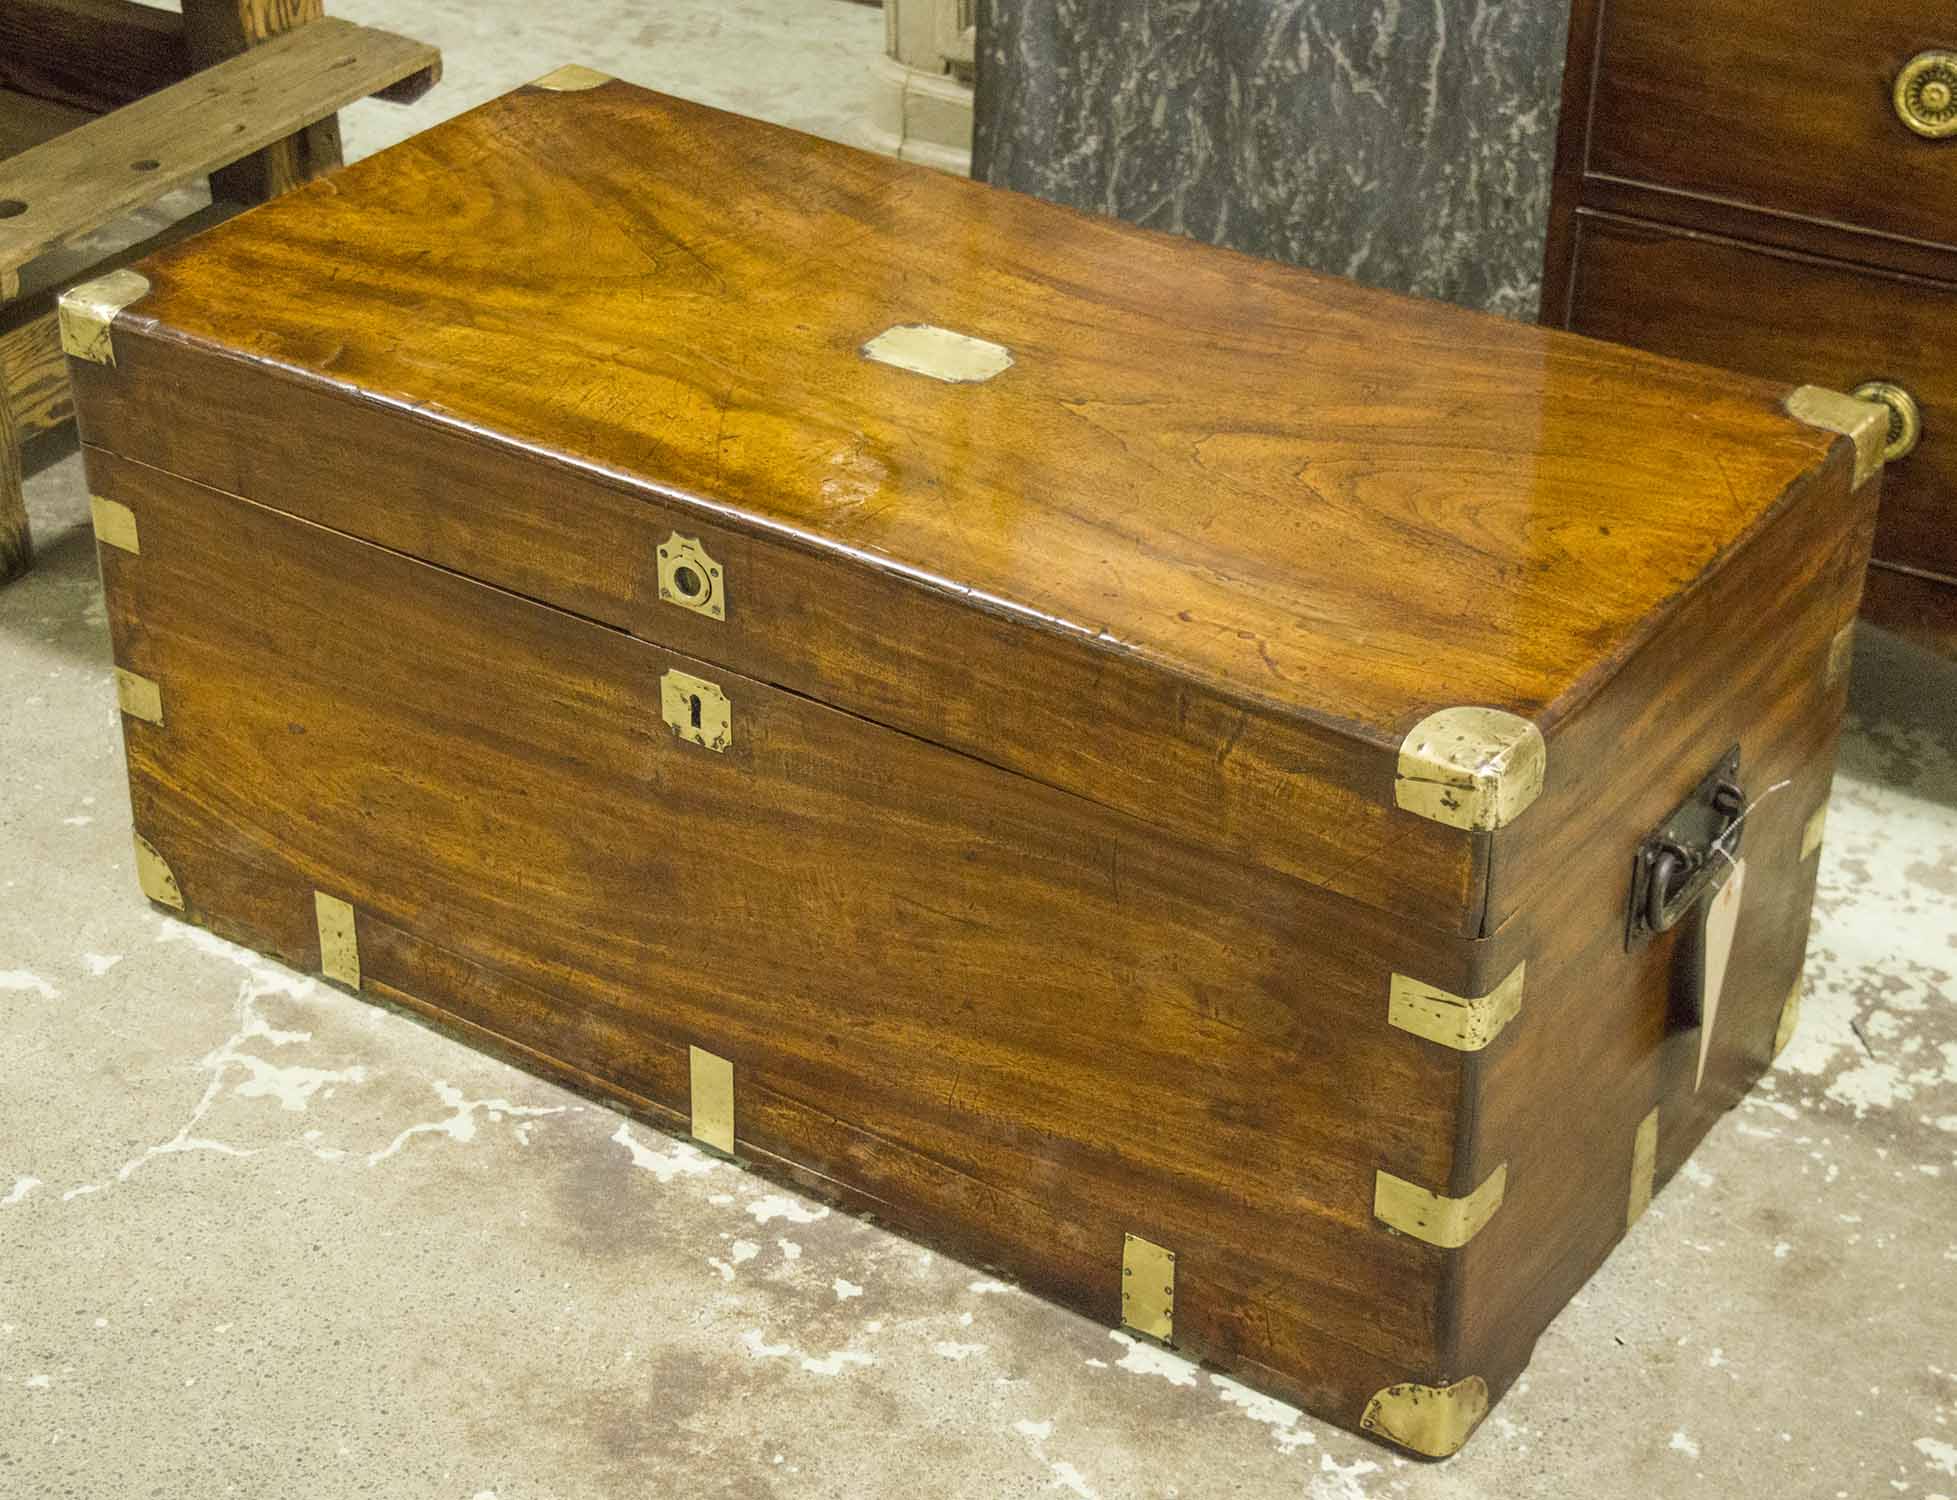 TRUNK, 19th century, camphorwood and brass bound, with rising lid and carrying handles,